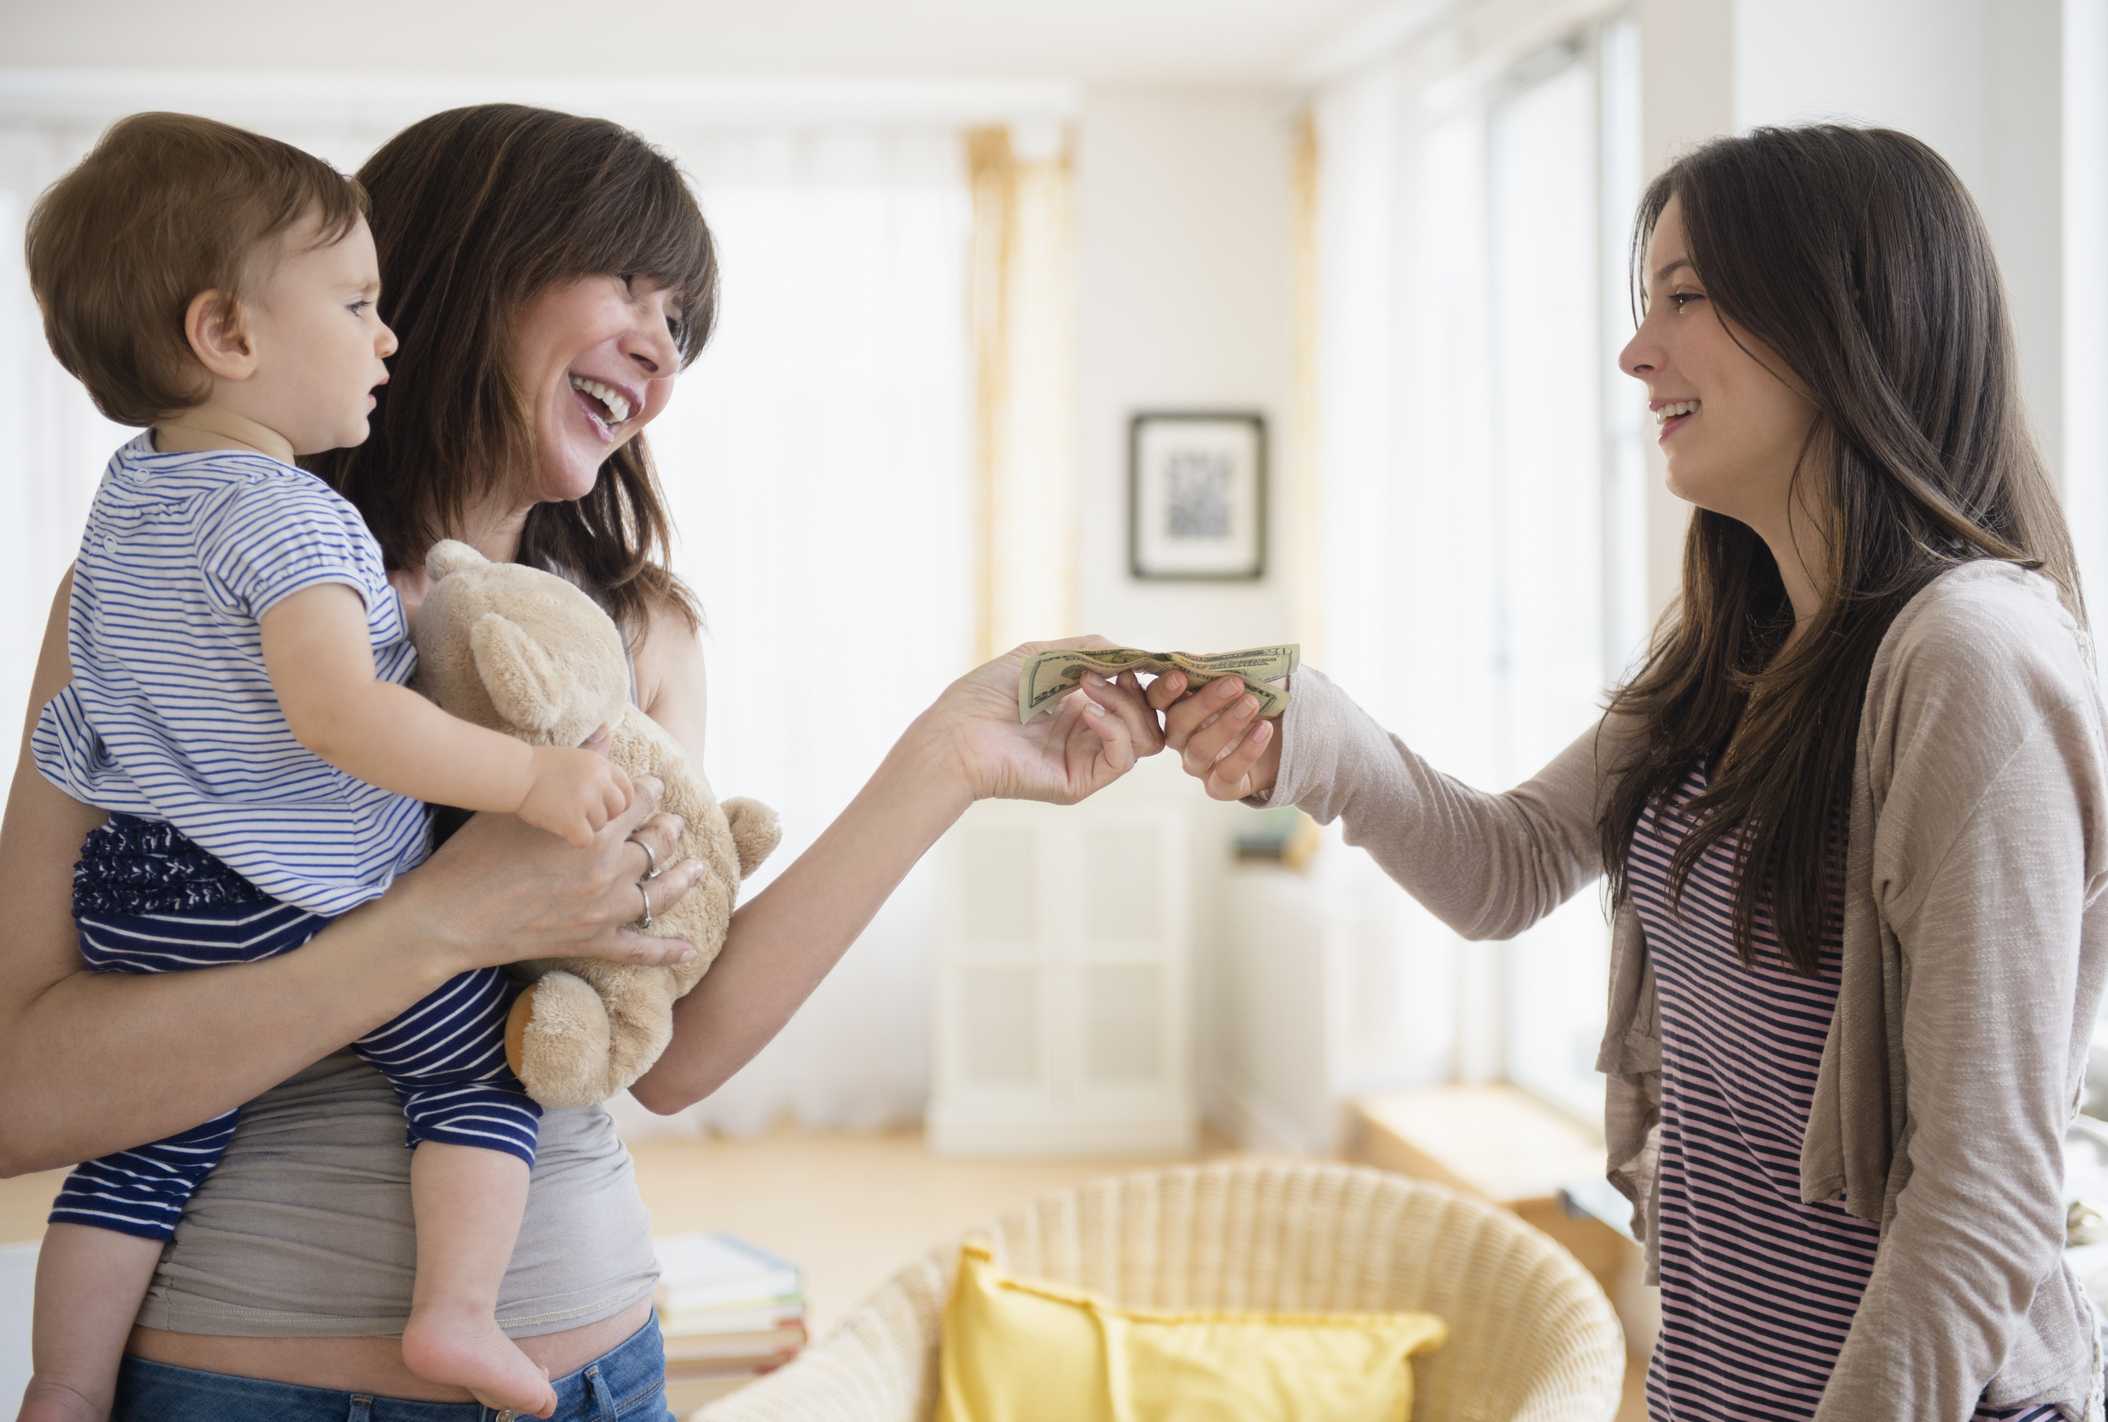 Here's how much it costs to get a babysitter around the country